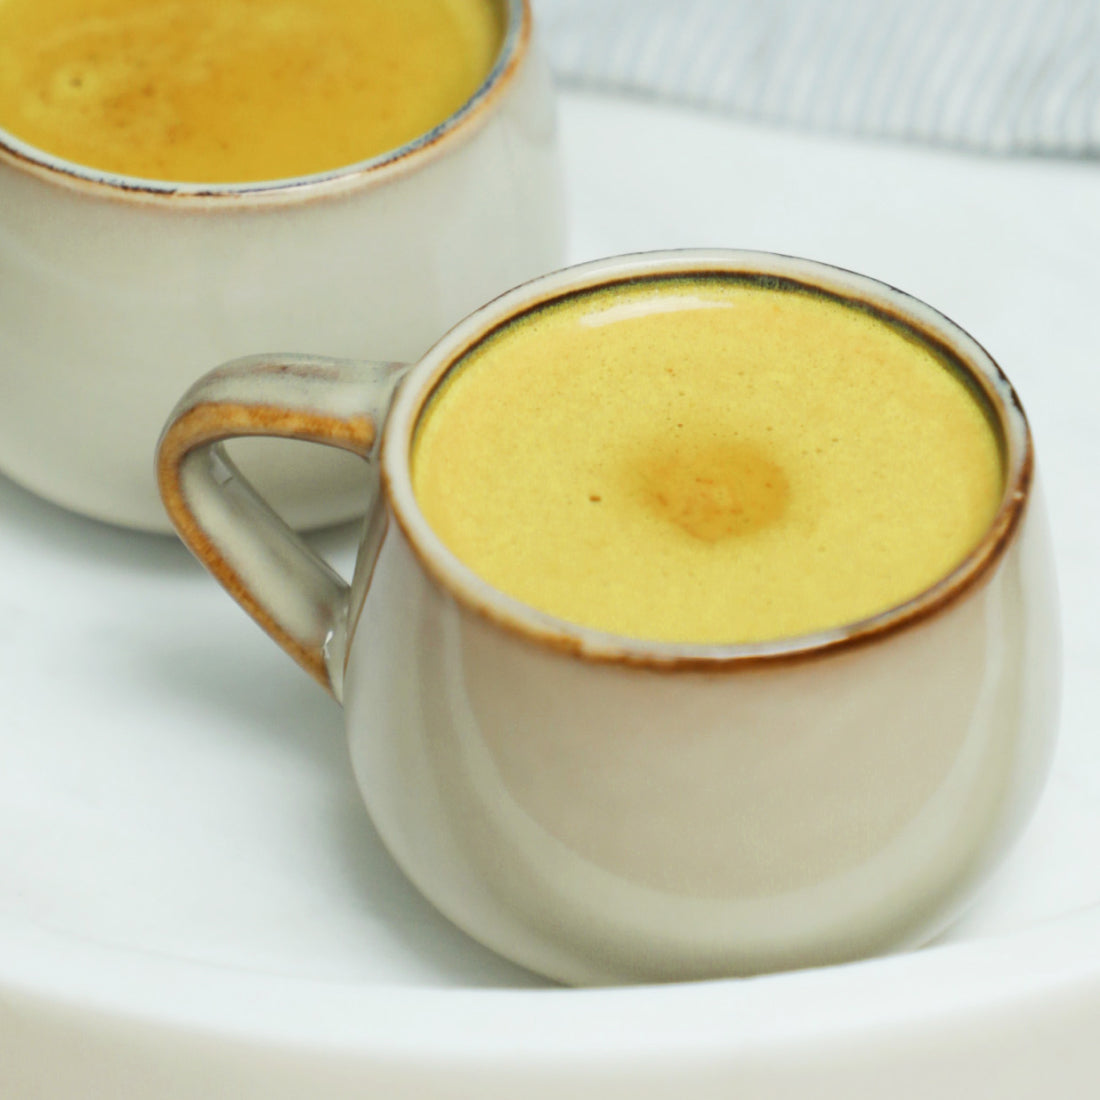 Savory Soups Enhanced with KIANO's Immune-Boosting Golden Turmeric Latte